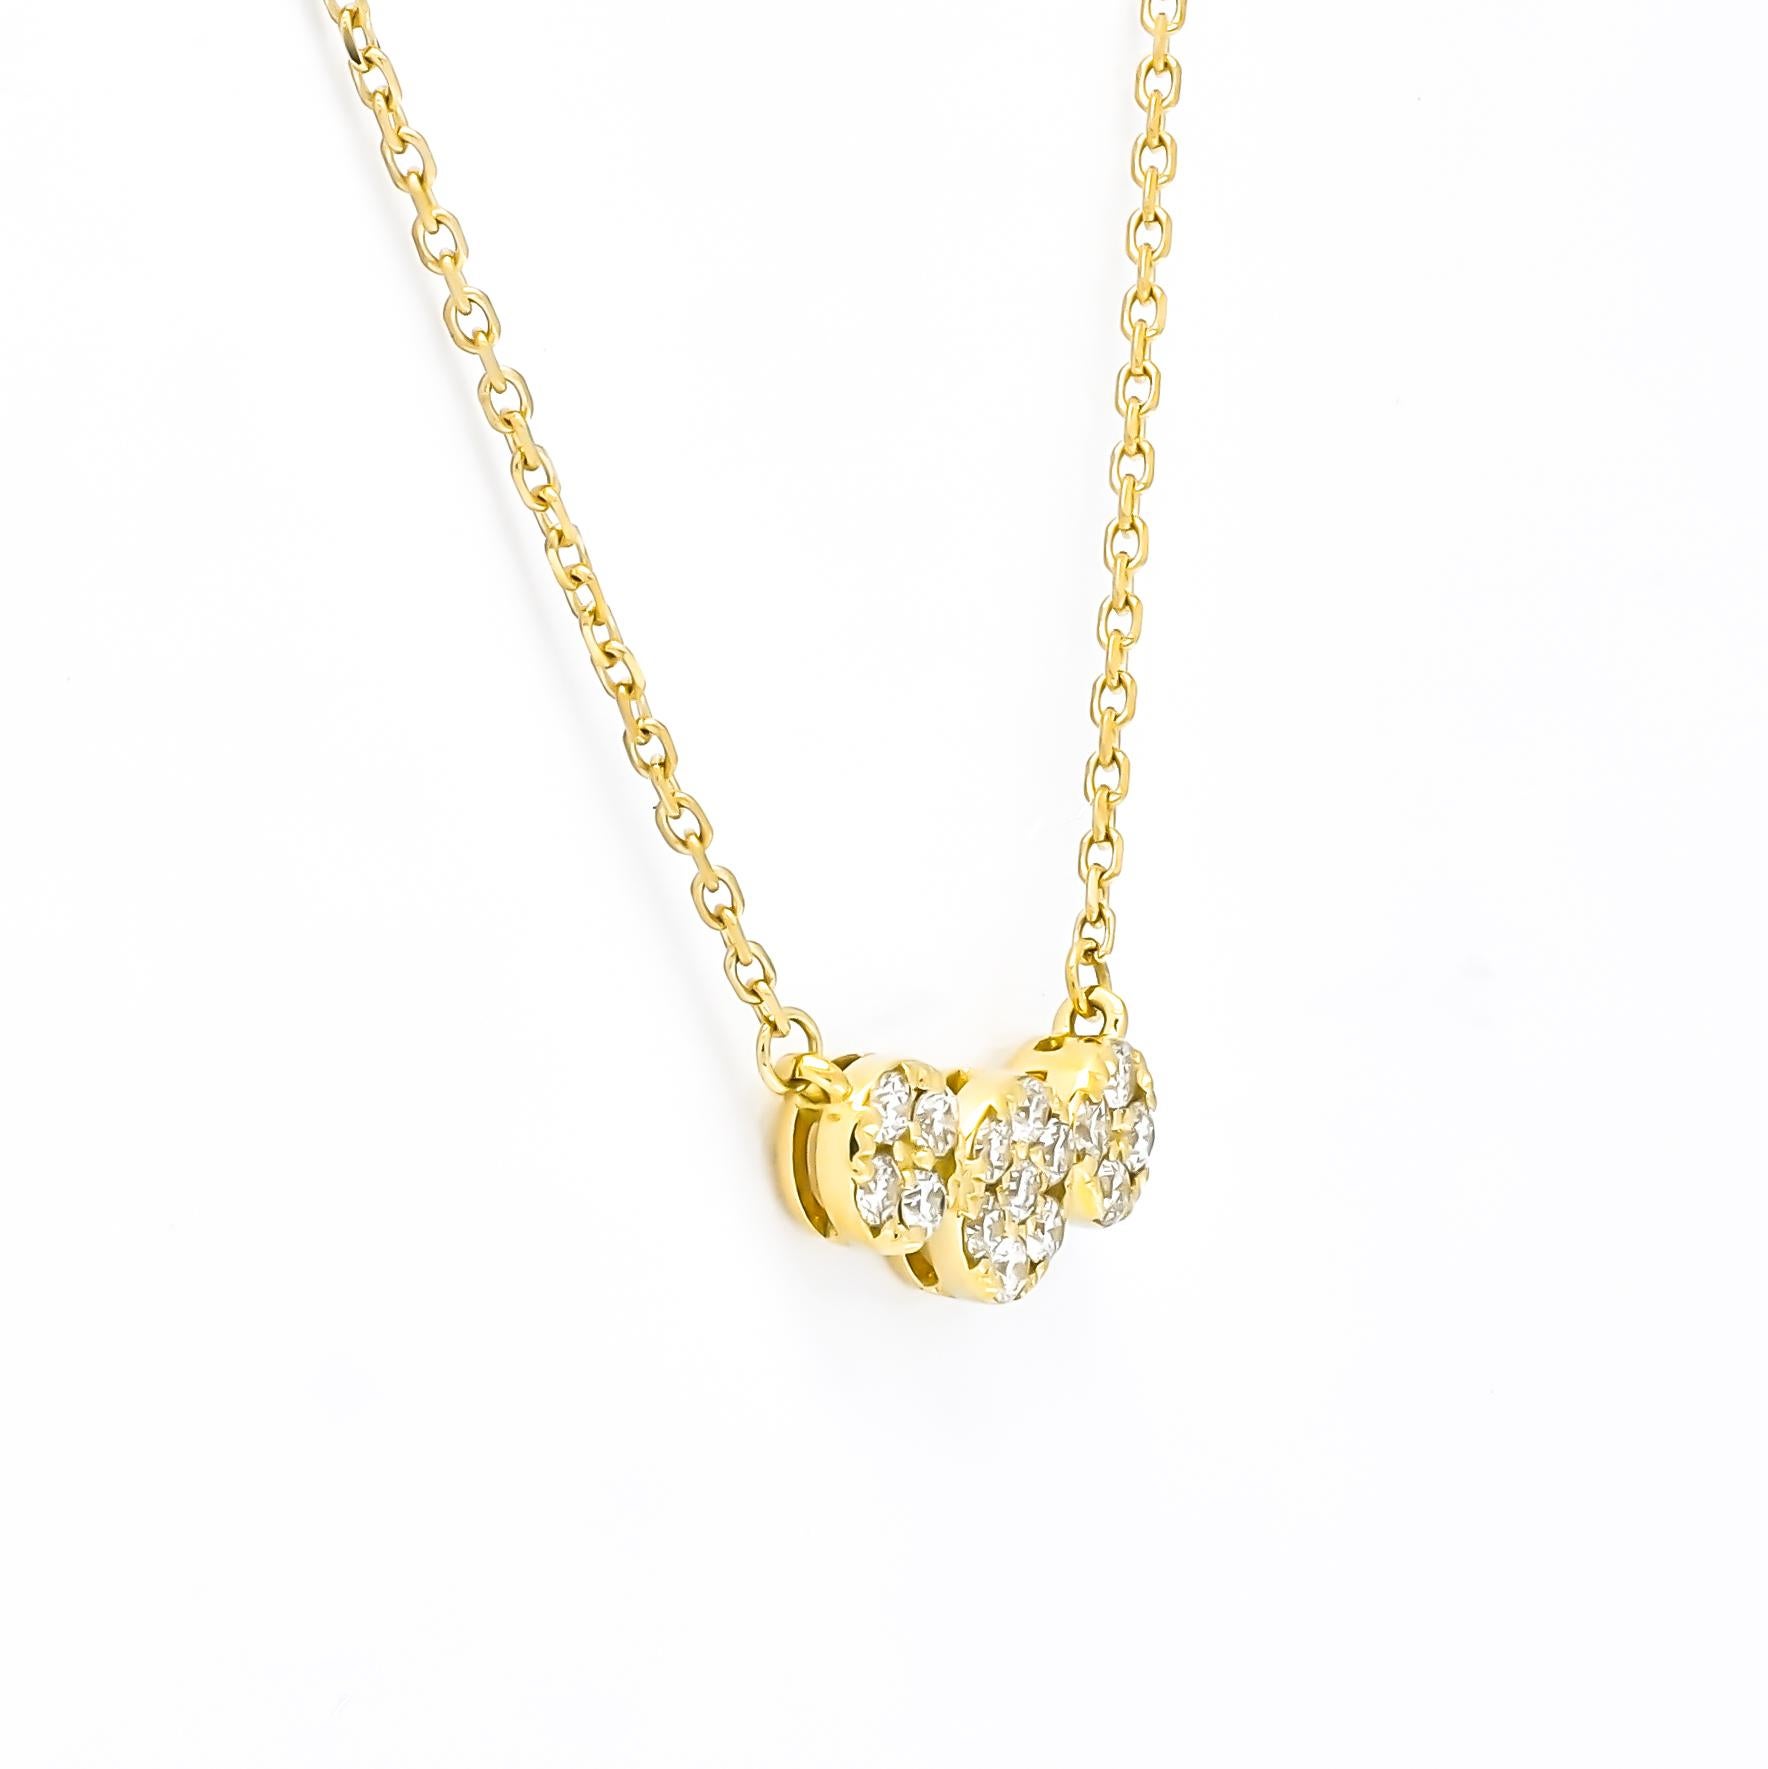 Natural Diamond 0.17 carats 18 KT Yellow Gold Chain Pendant Necklace  For Sale 1